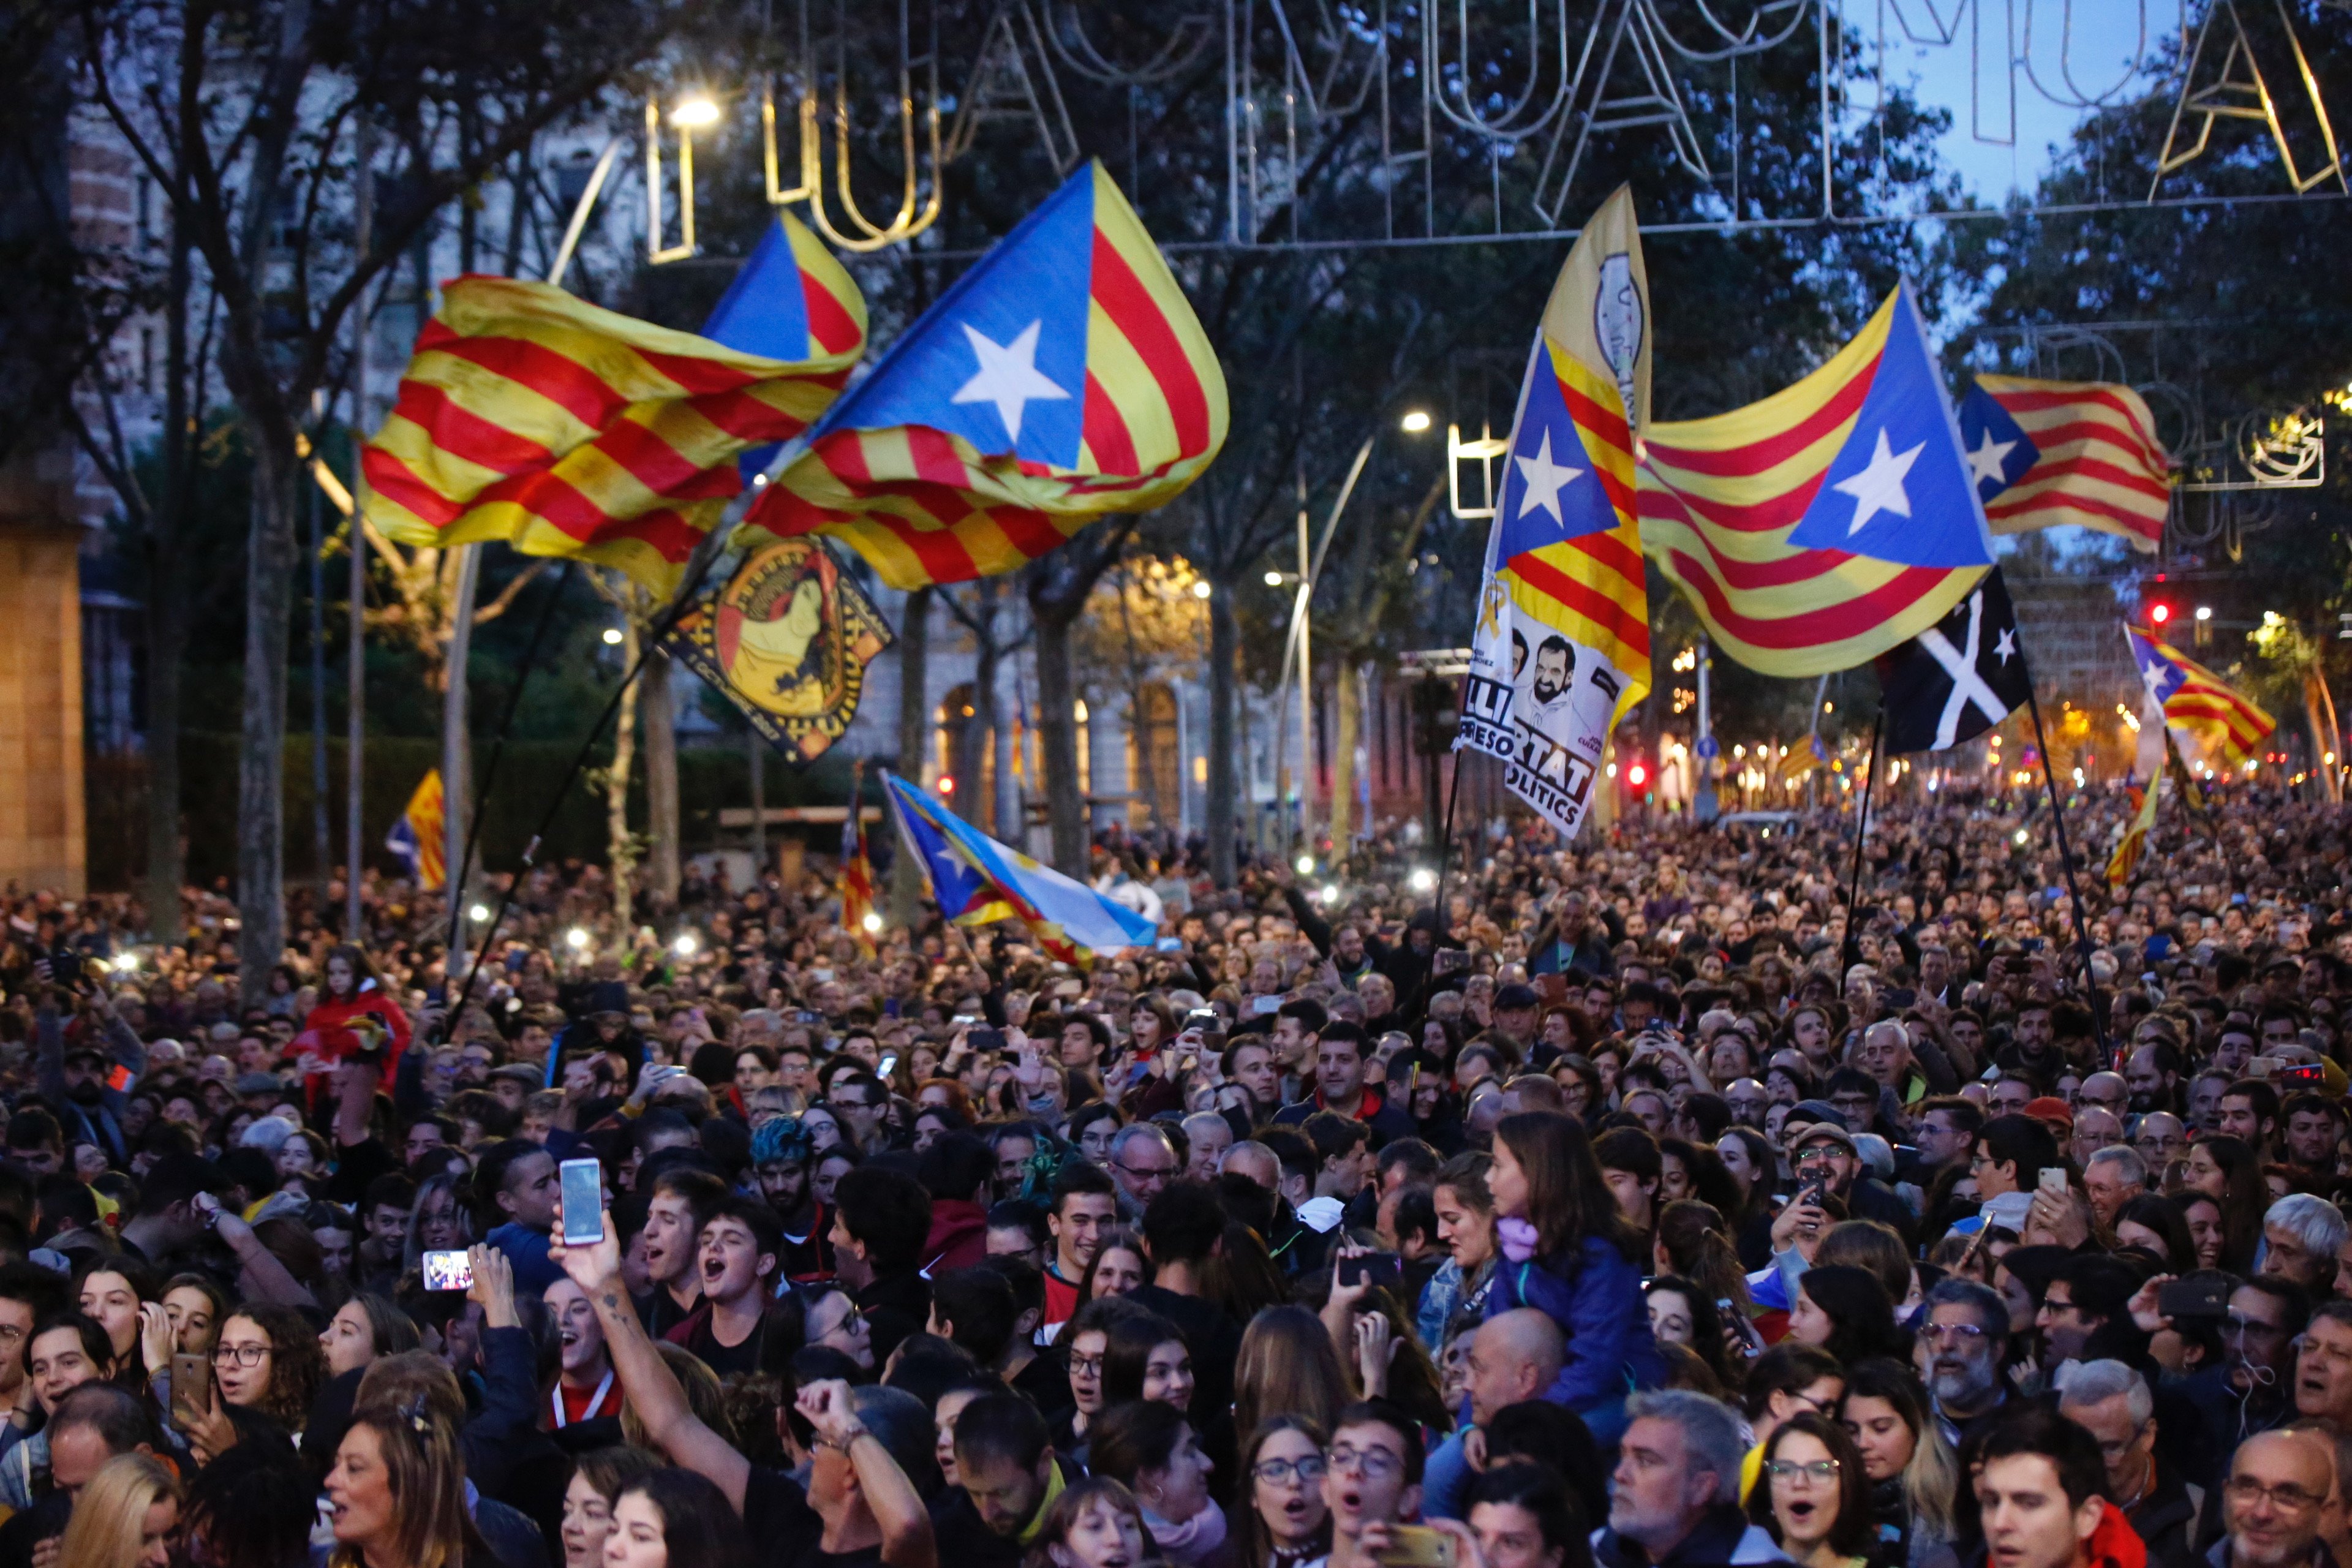 From 1 seat to 23: the surge of Catalan pro-independence parties